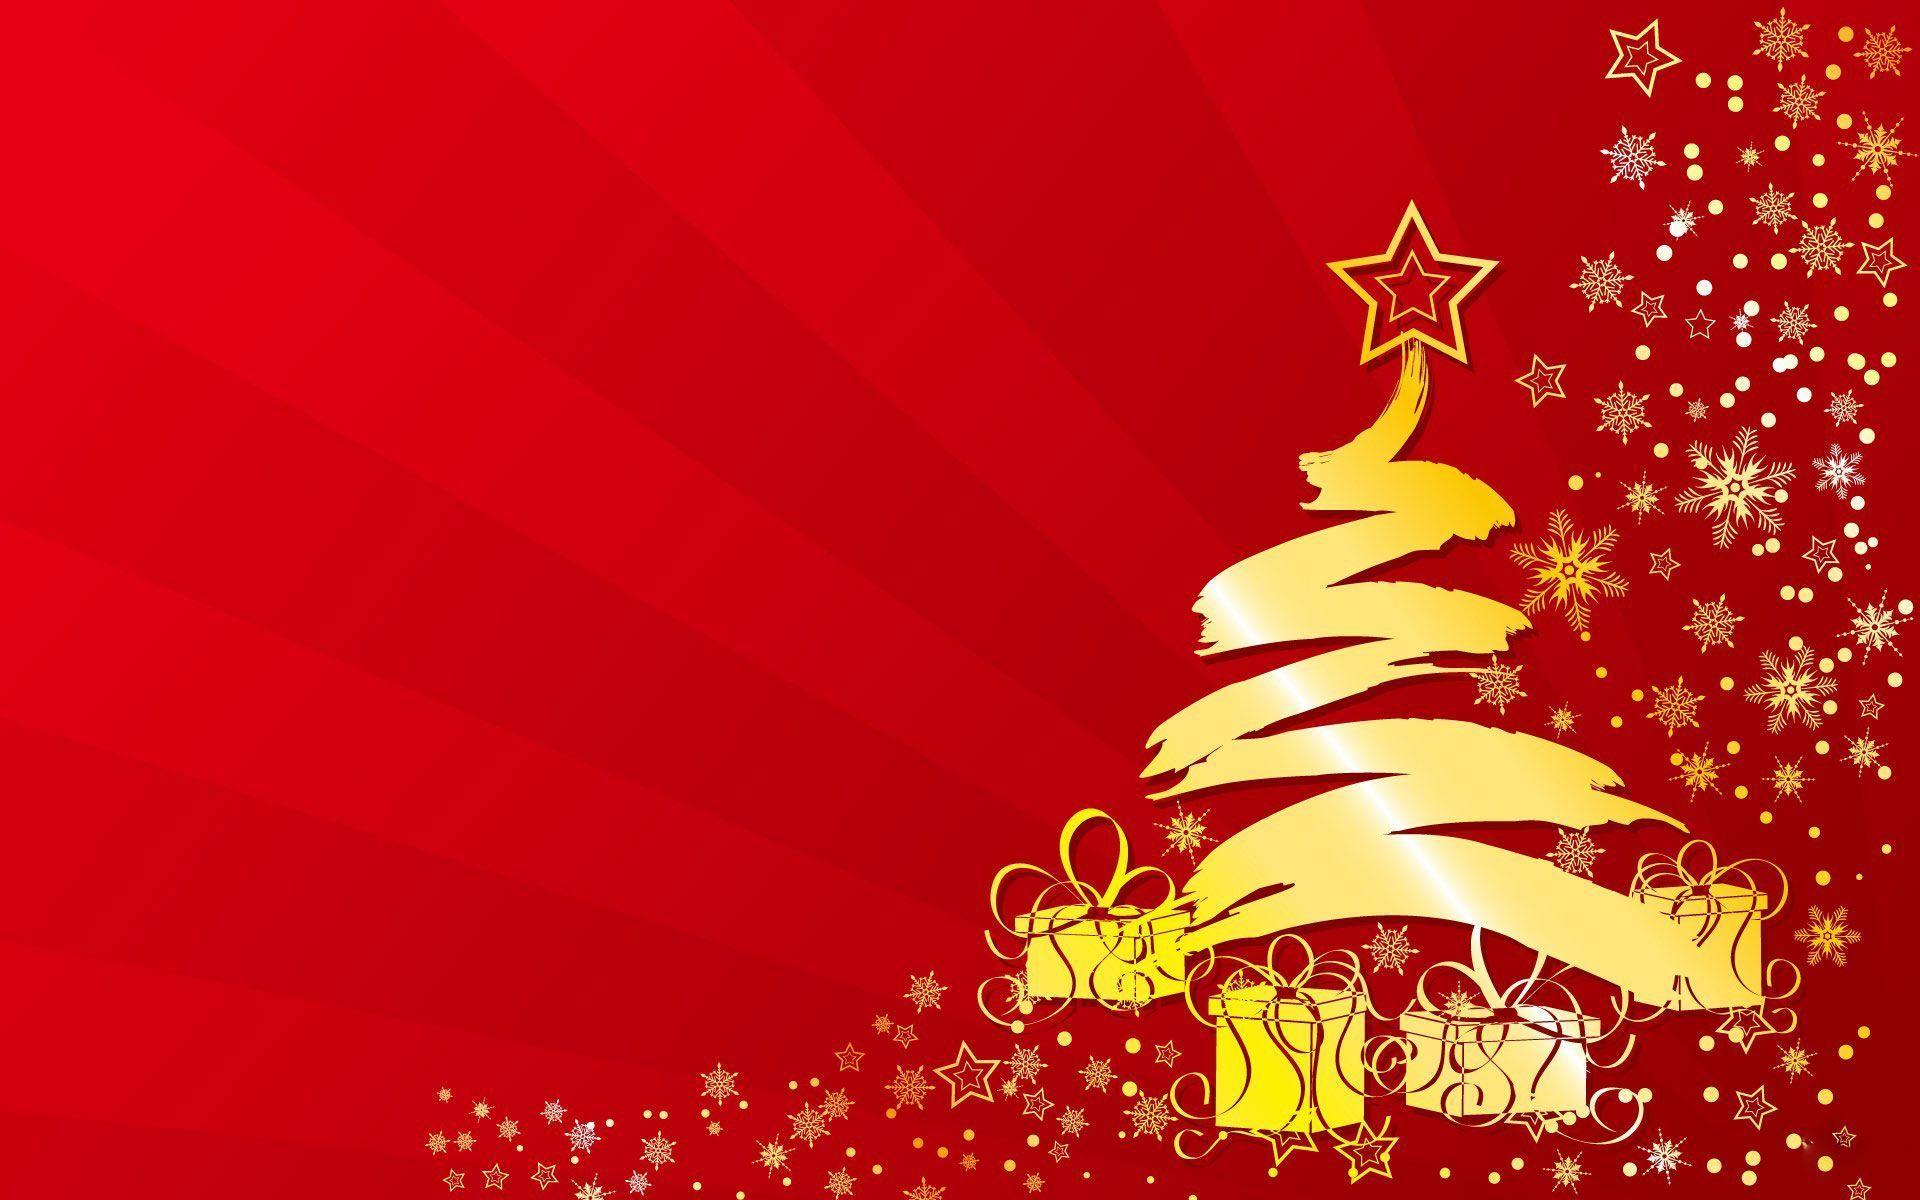 Christmas Wallpaper for 2014. Facebook Christmas Covers. High